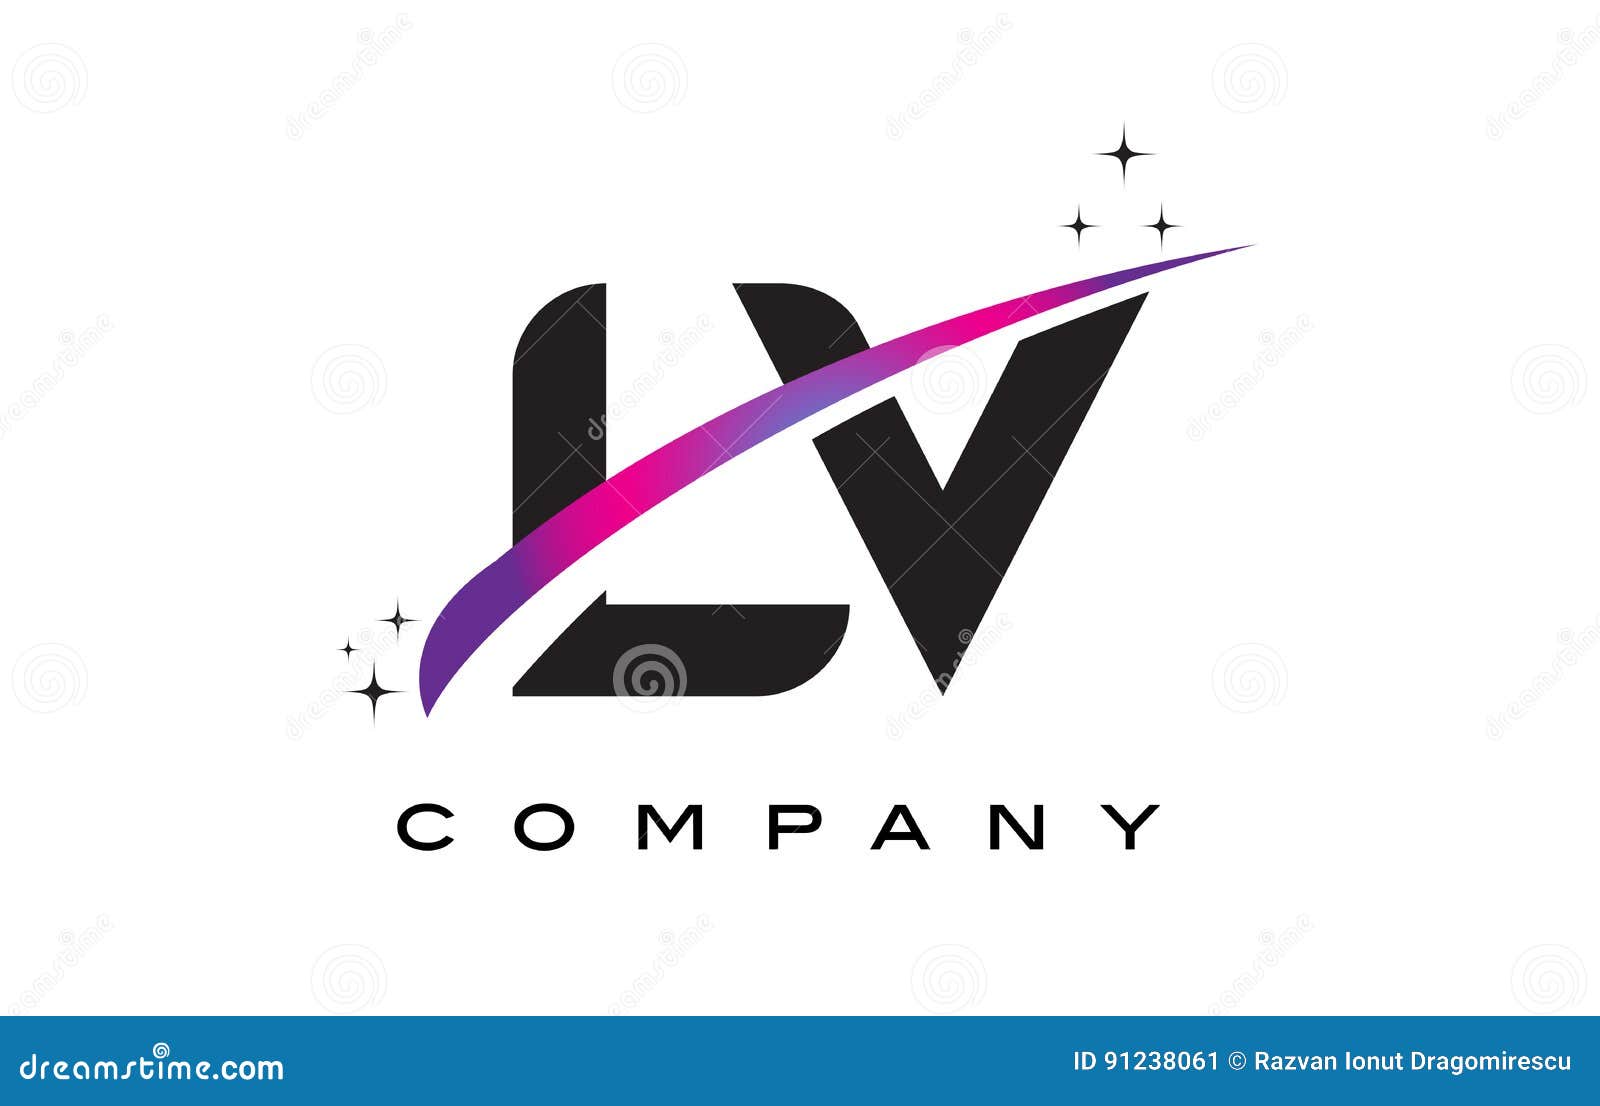 Lv letter logo design with simple style Royalty Free Vector